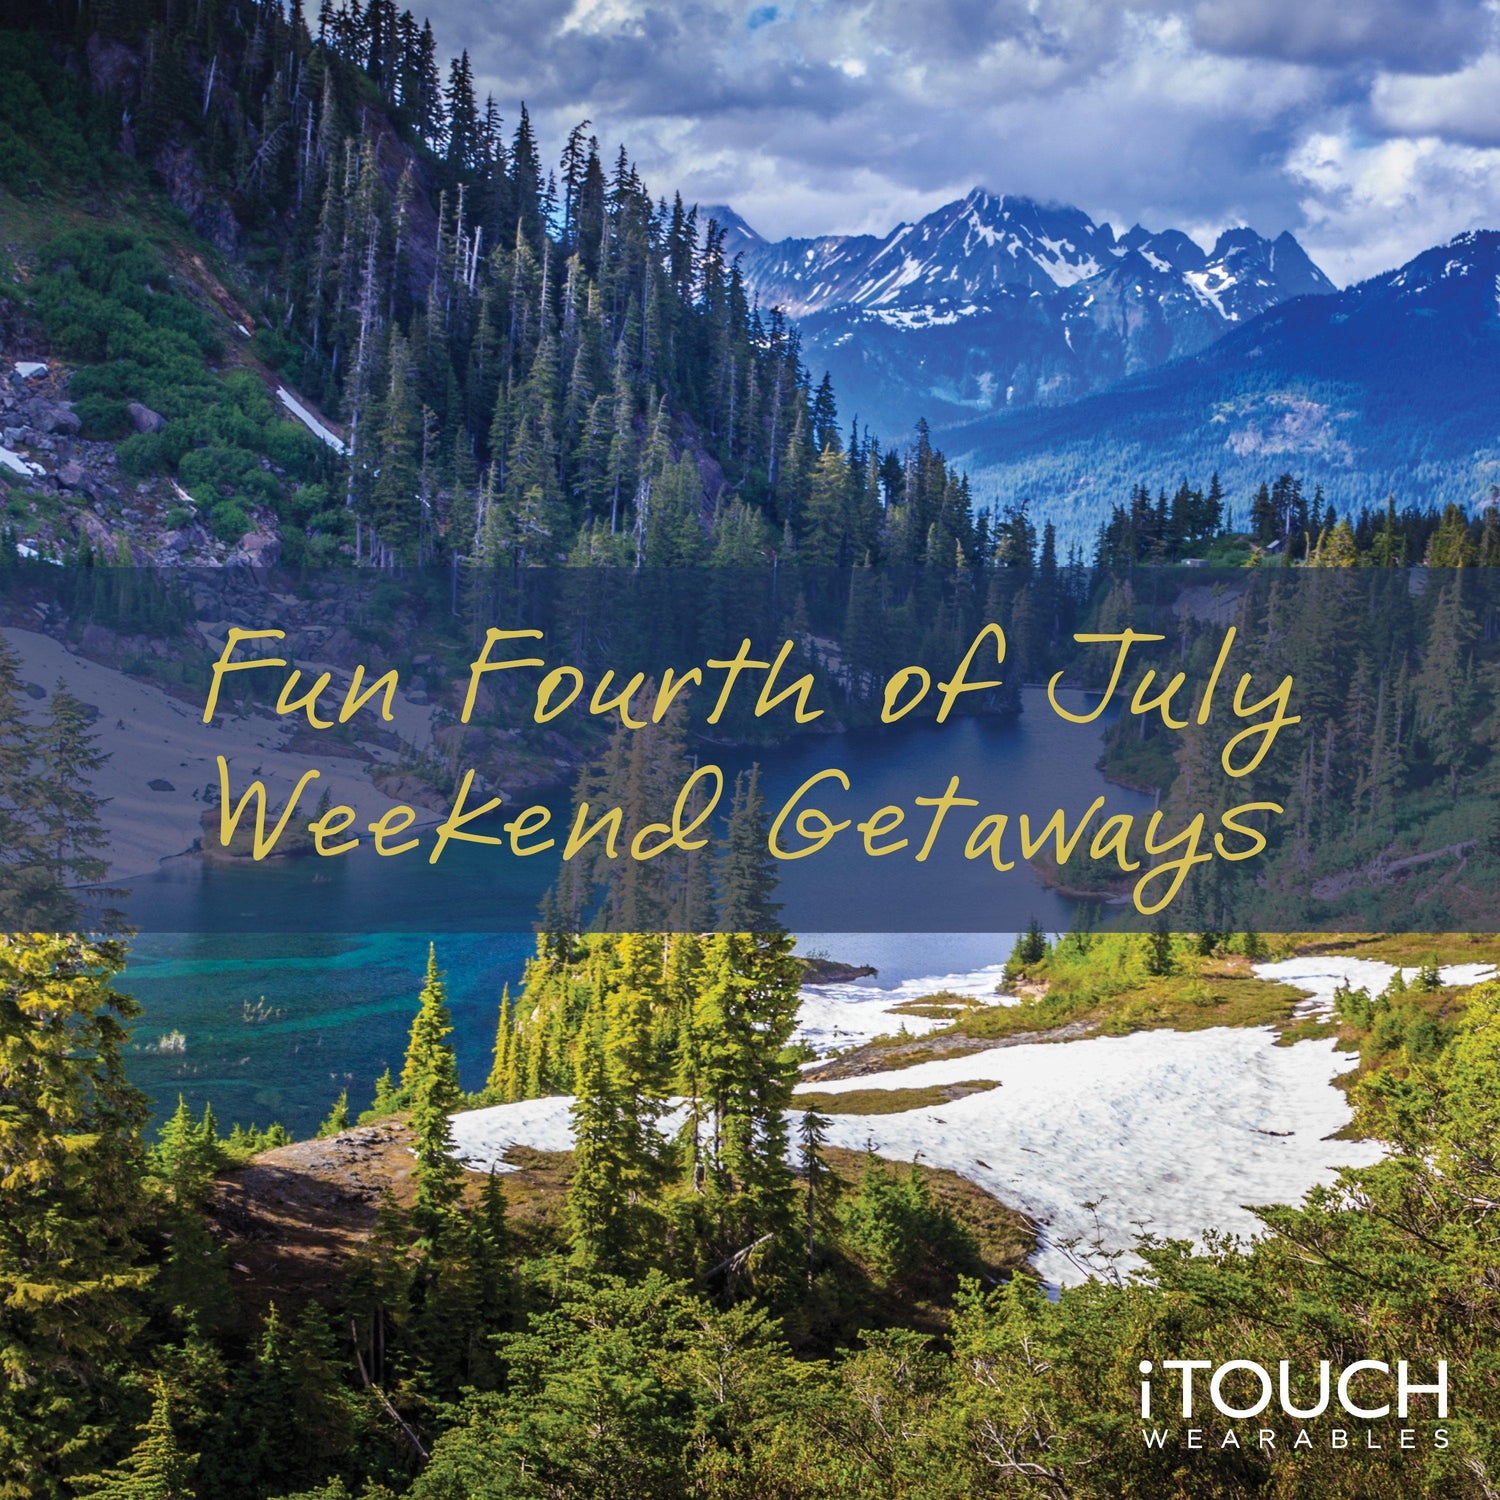 Fun Fourth Of July Weekend Getaways - iTOUCH Wearables